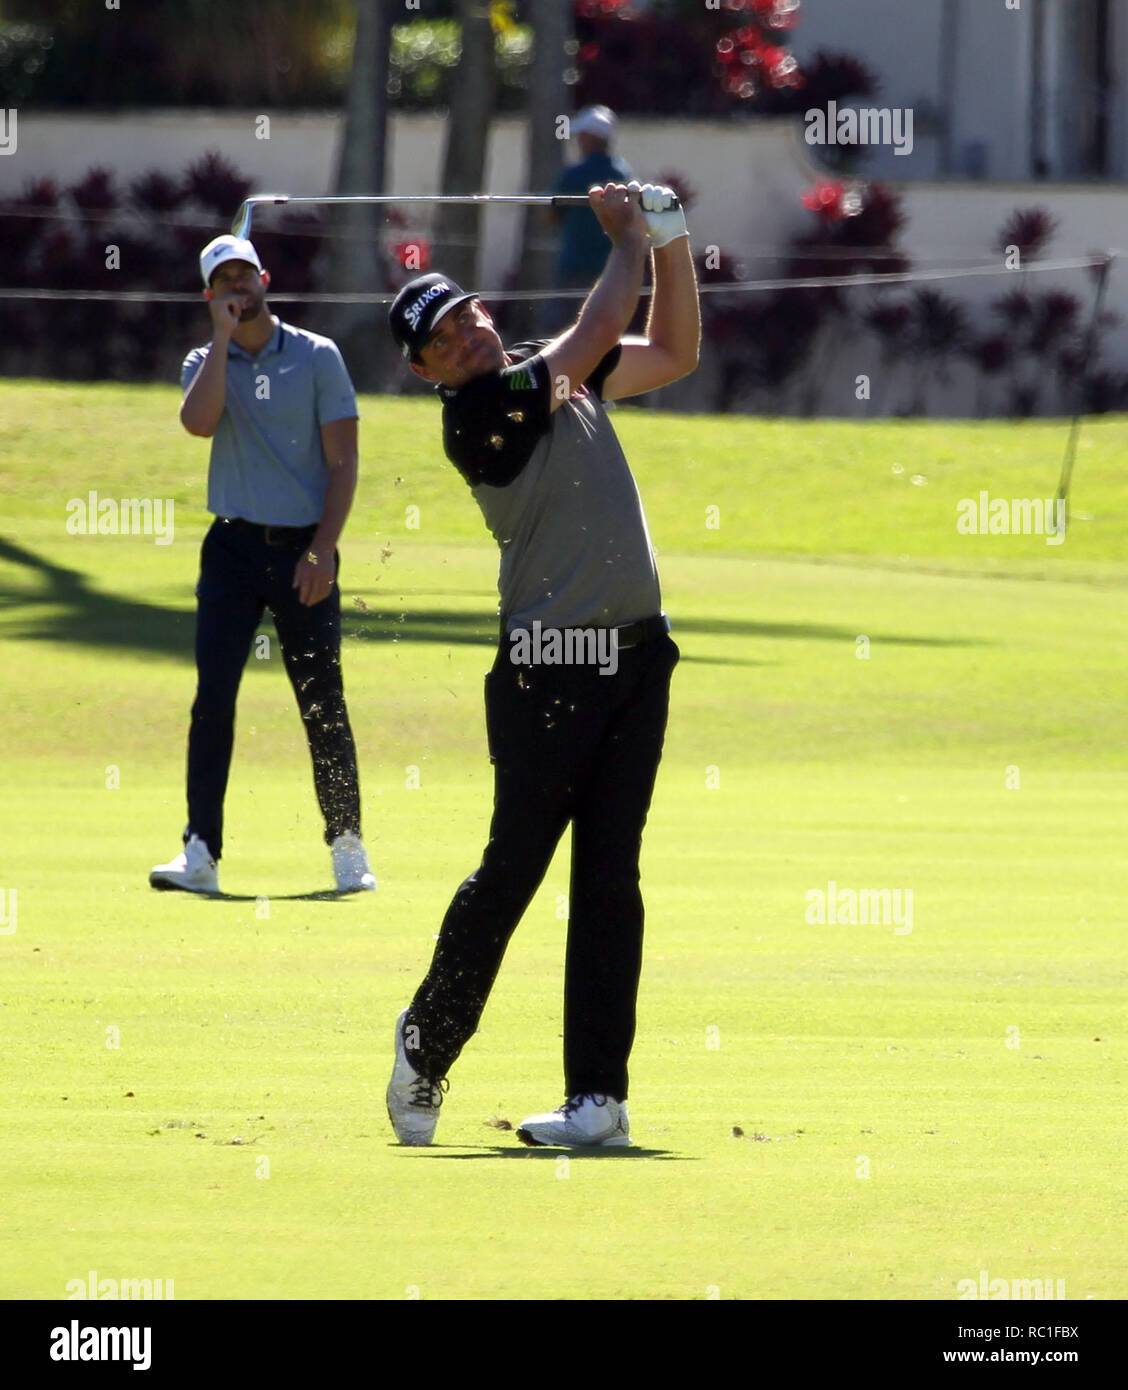 Waialae Country Club, Honolulu, USA. January 11, 2019 - Keegan Bradley hits from the 14th fairway during the second round of the PGA Sony Open at the Waialae Country Club in Honolulu, HI - Michael Sullivan/CSM Credit: Cal Sport Media/Alamy Live News Stock Photo